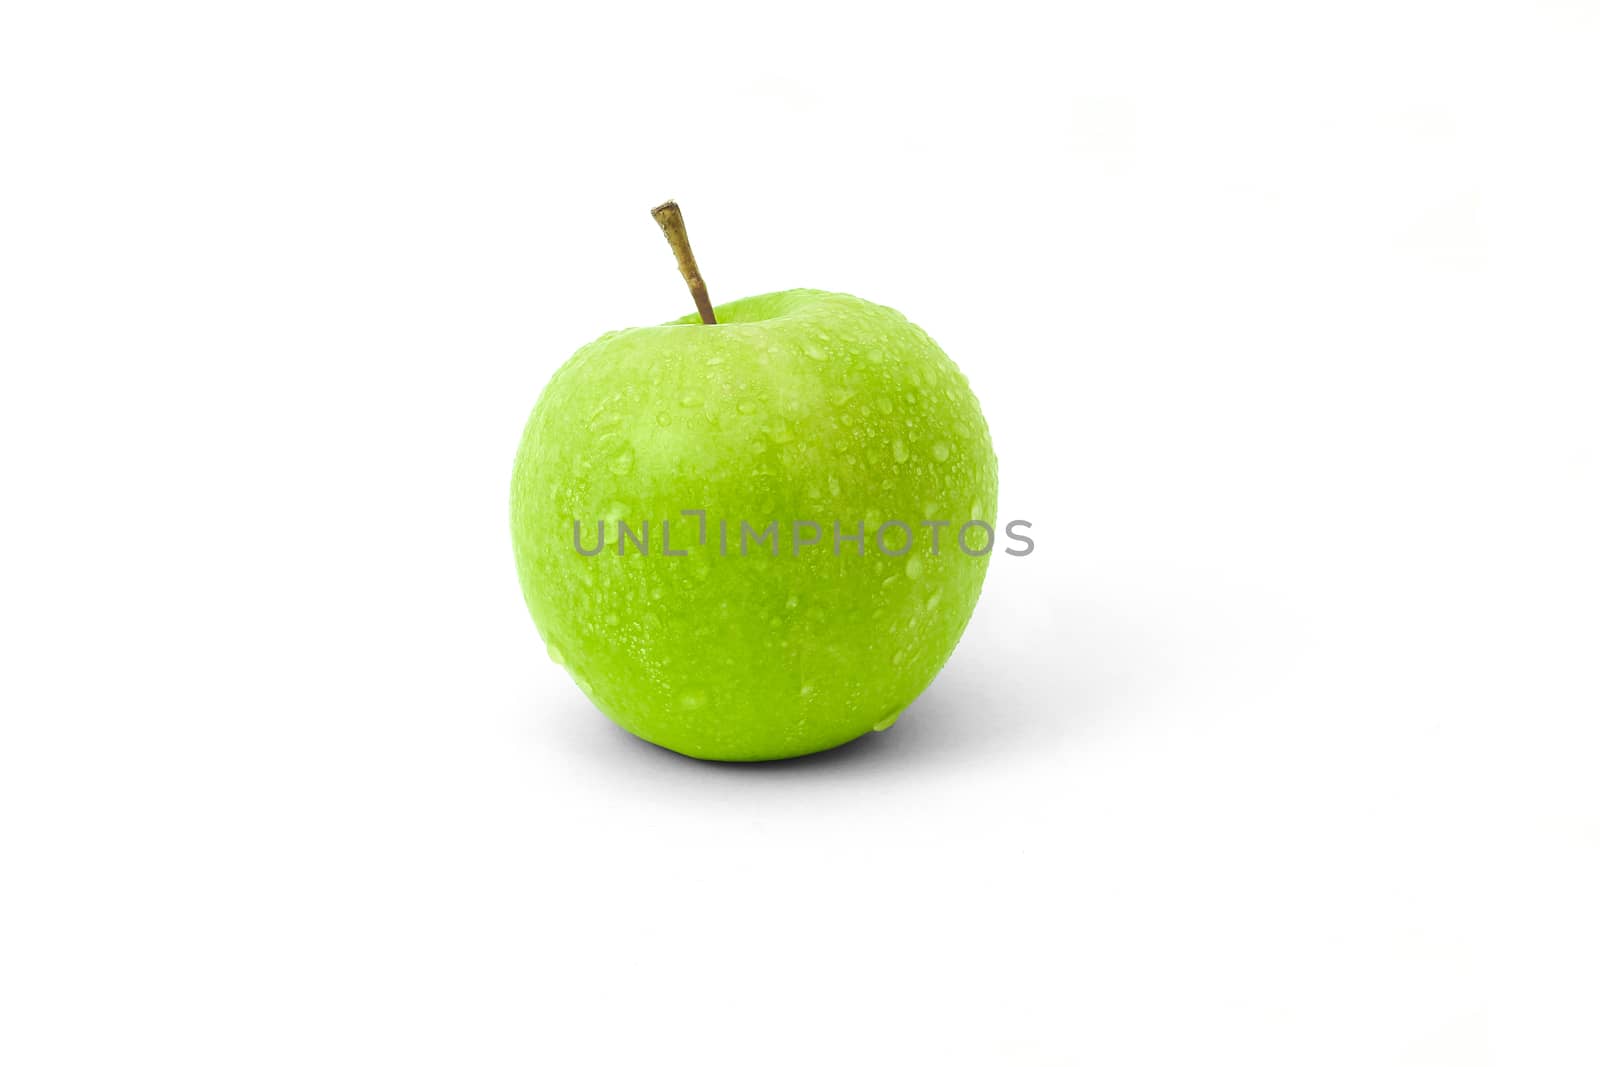 Fresh green Granny Smith apple sprayed with waterdrops - isolated on a white background